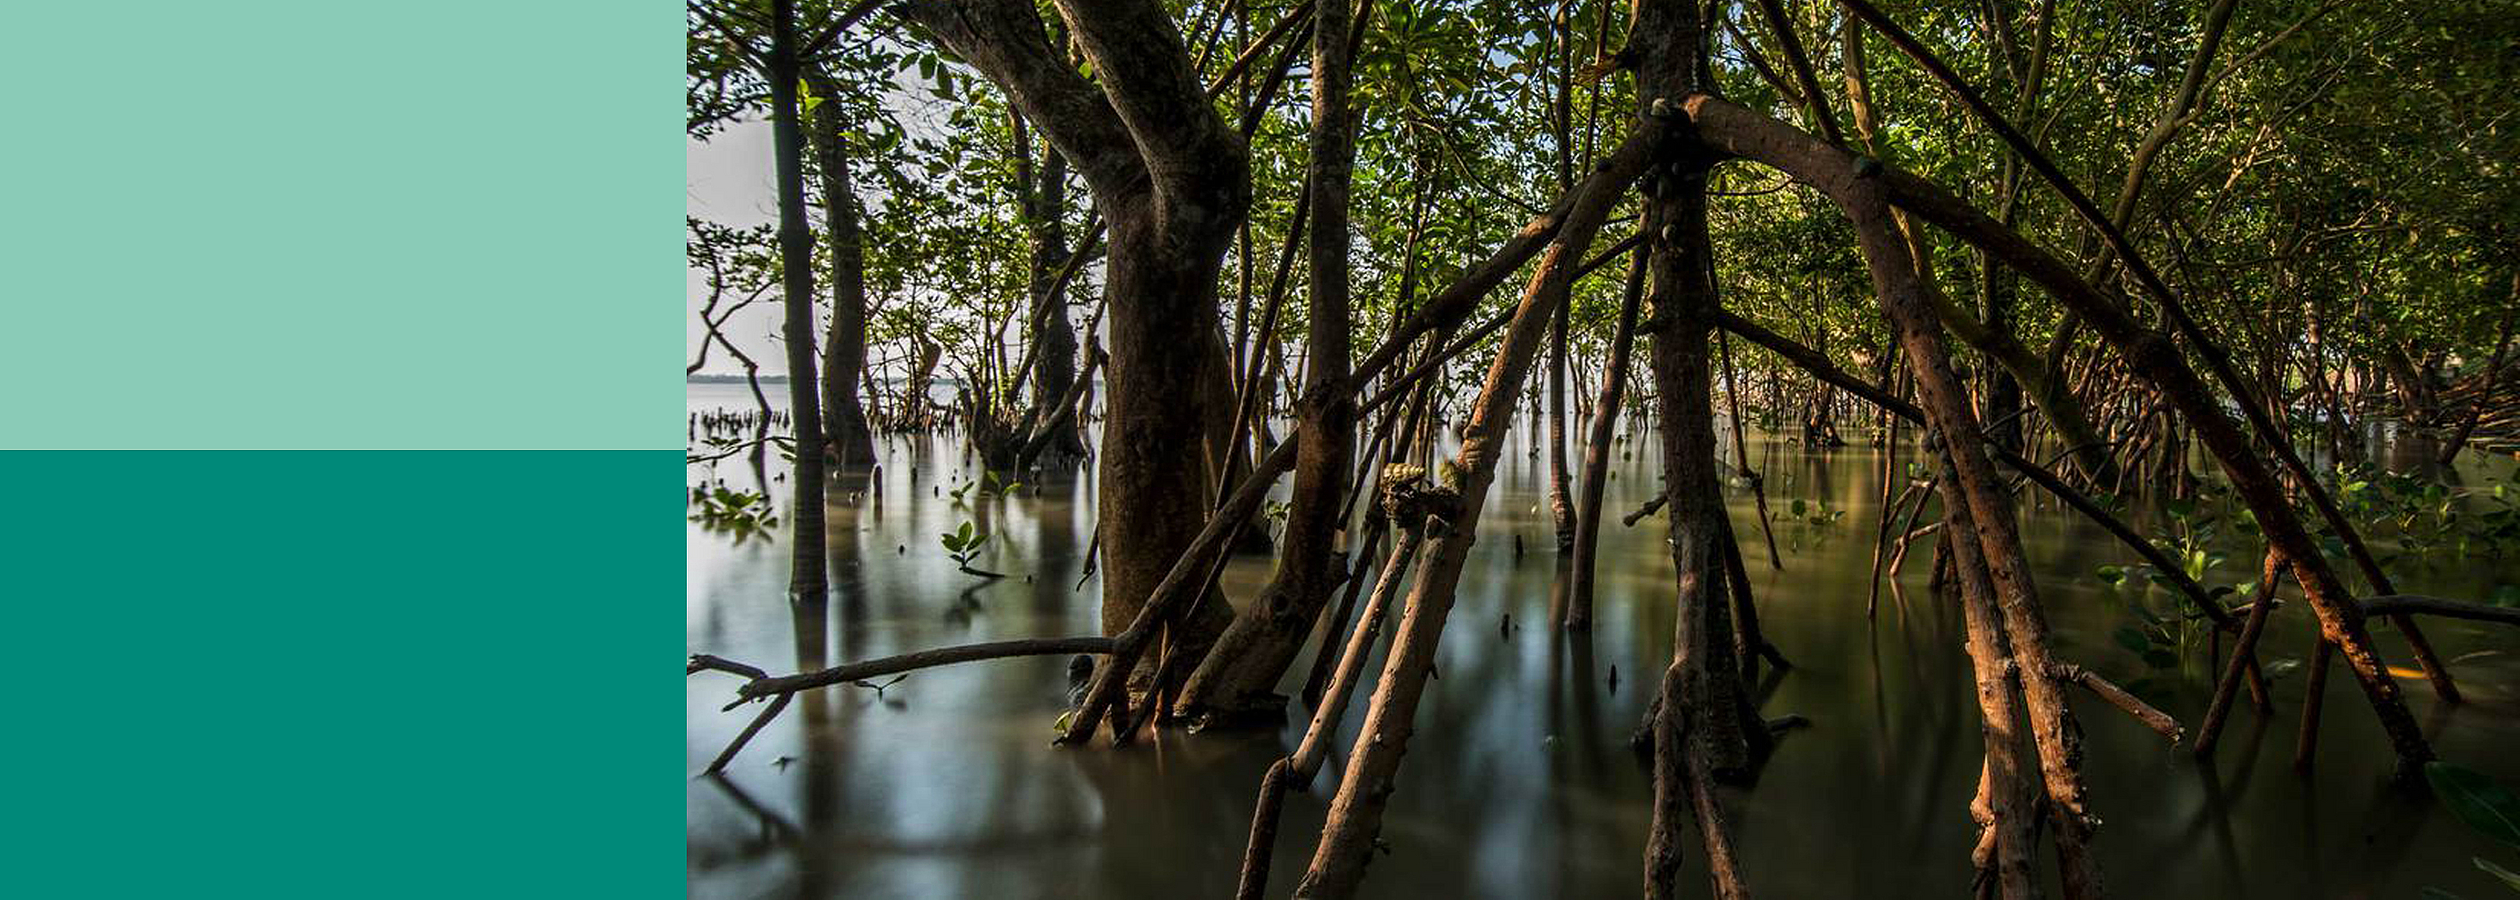 Mangroves are tidal forests; they thrive in an extremely saline environment.